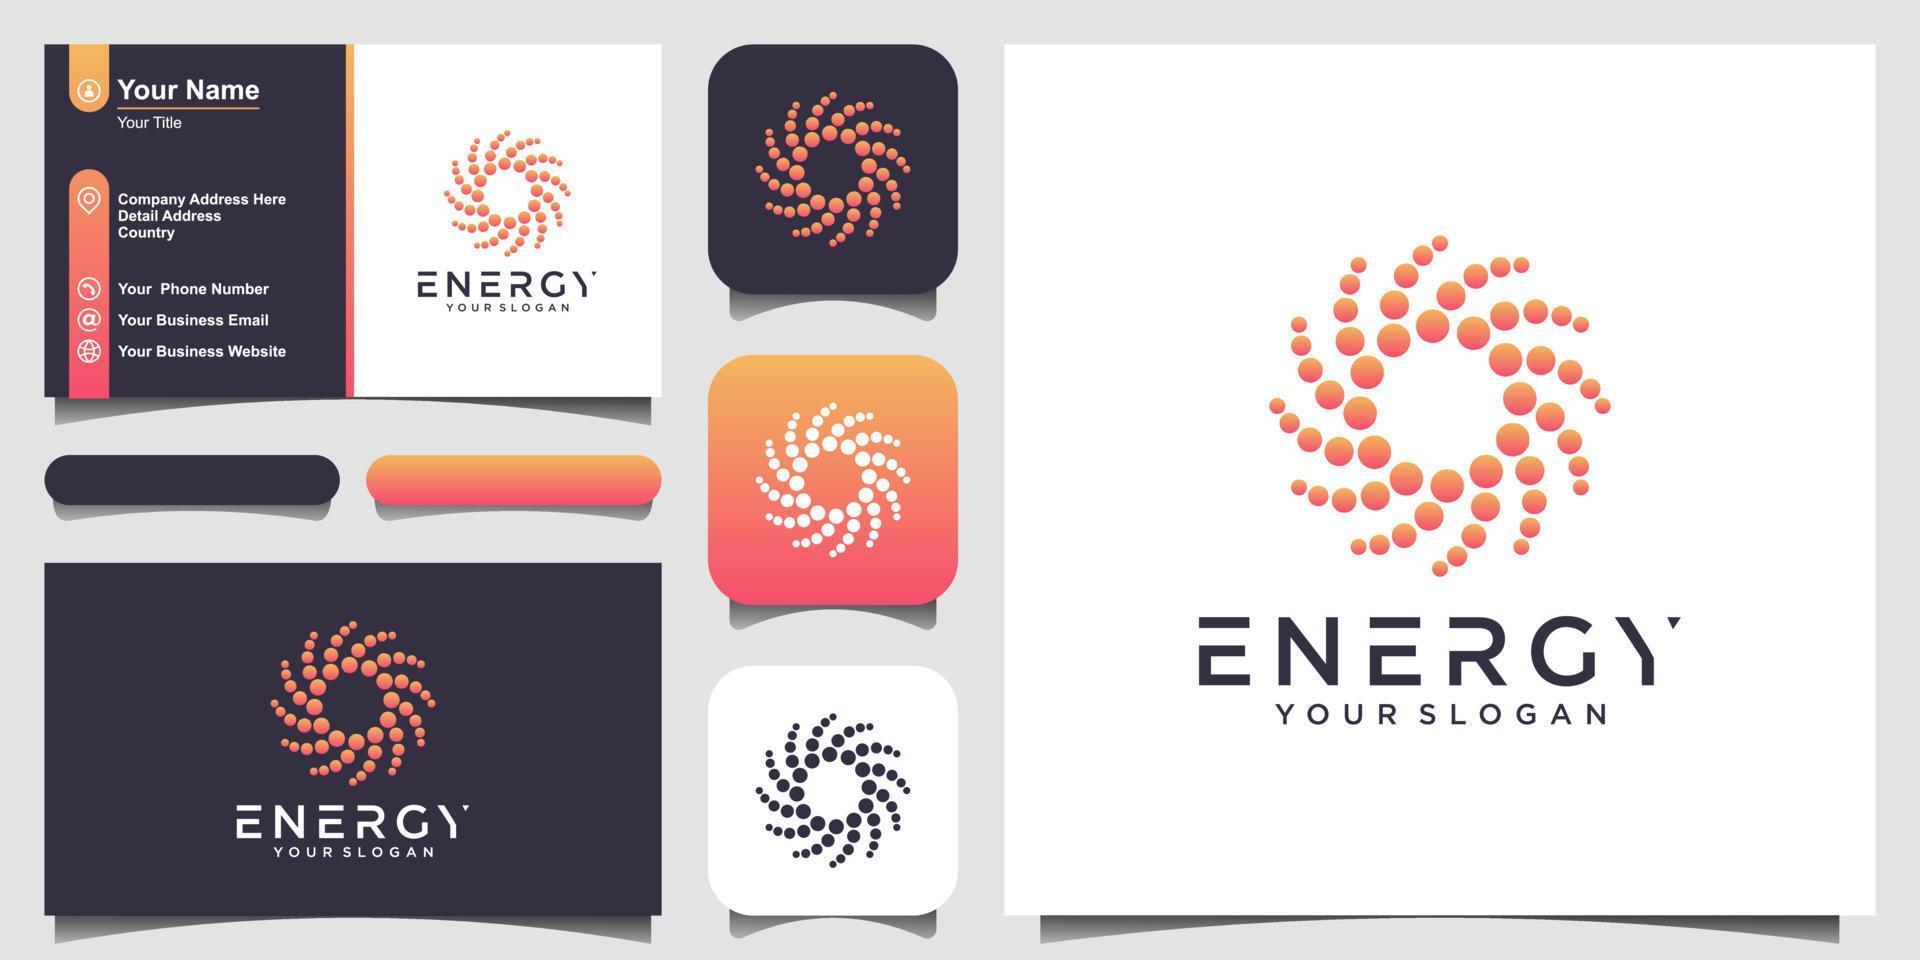 solar abstract round shape logo and business card design. dotted stylized sun logotype vector illustration.